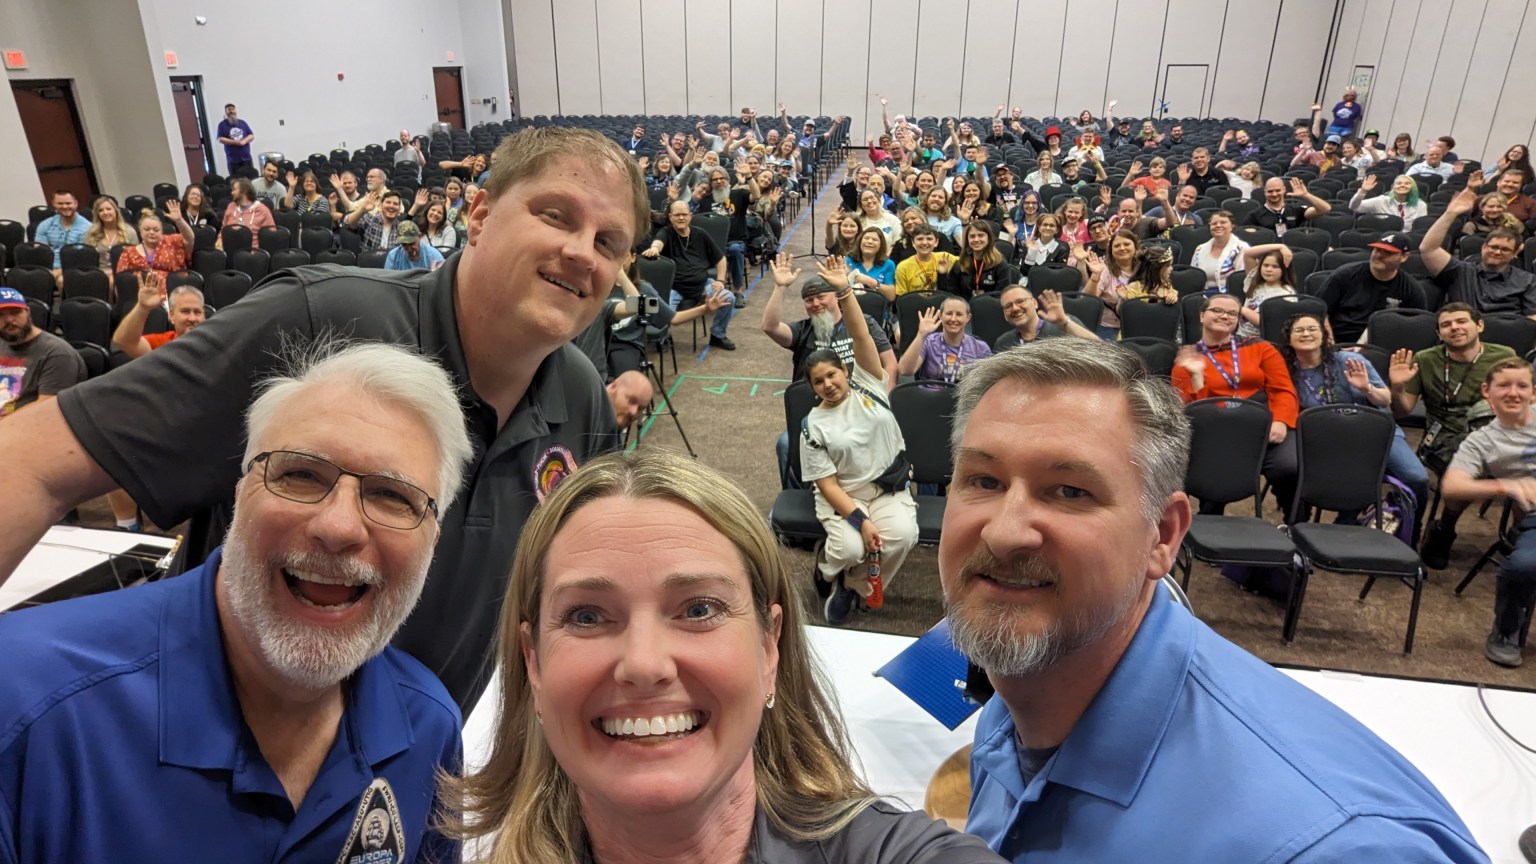 From left, Scott Bellamy, Brad Zavodsky, Solveig Irvine, and Brian Mulac pose for a selfie after speaking during a NASA science panel at the Huntsville Comic & Pop Culture Expo on April 13. The group discussed the upcoming science missions managed by the Planetary Missions Program Office.